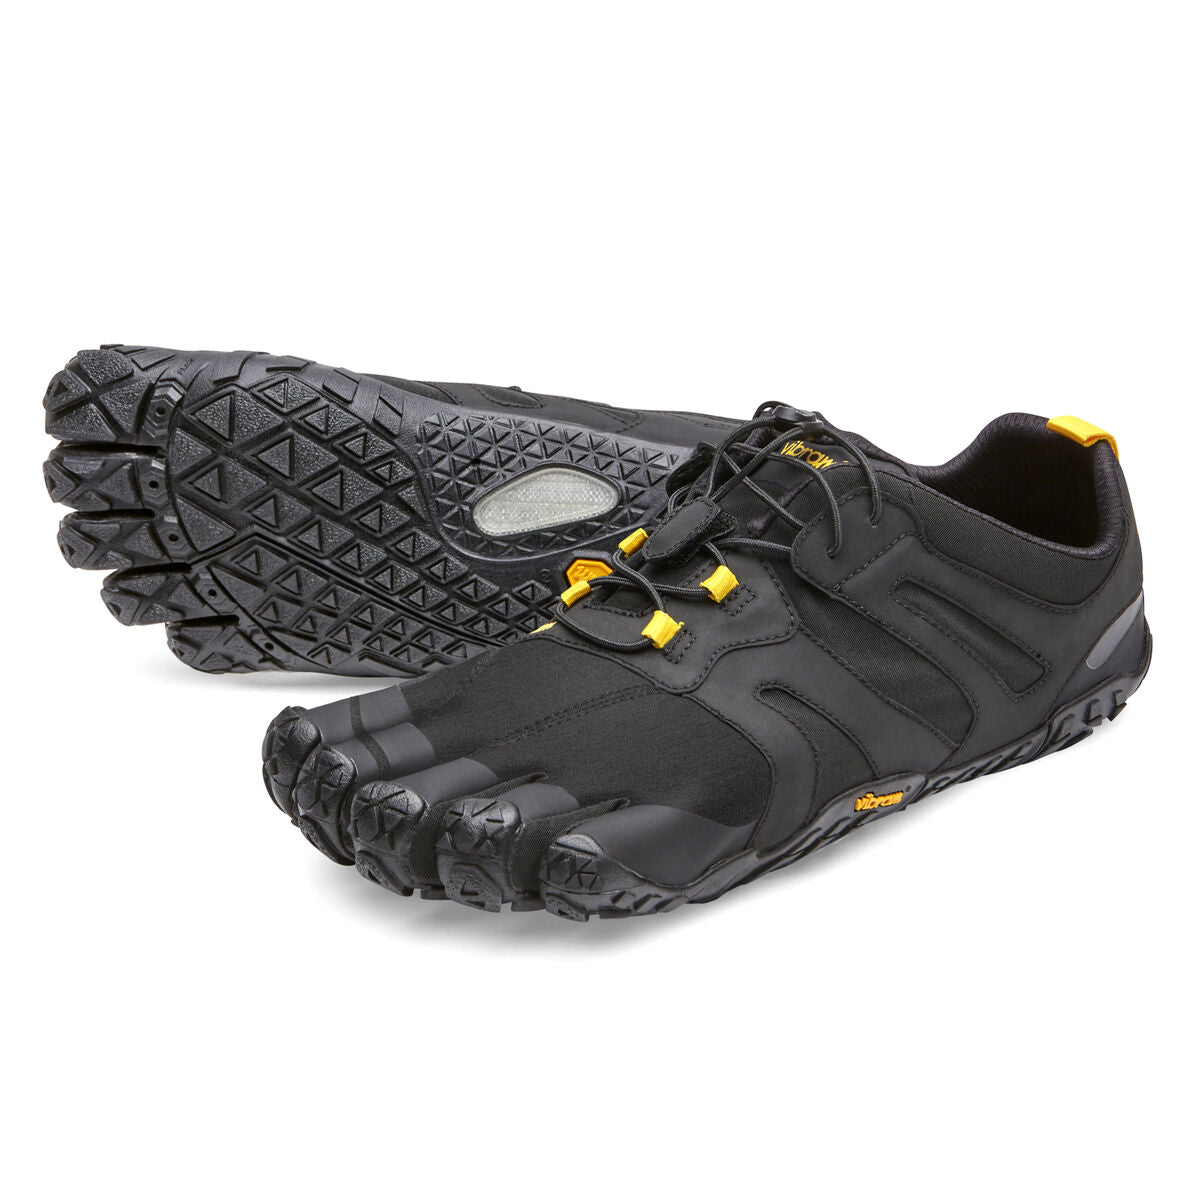 Men's Vibram Five Fingers V-Trail 2.0 Running Shoe in Black/Yellow from the front